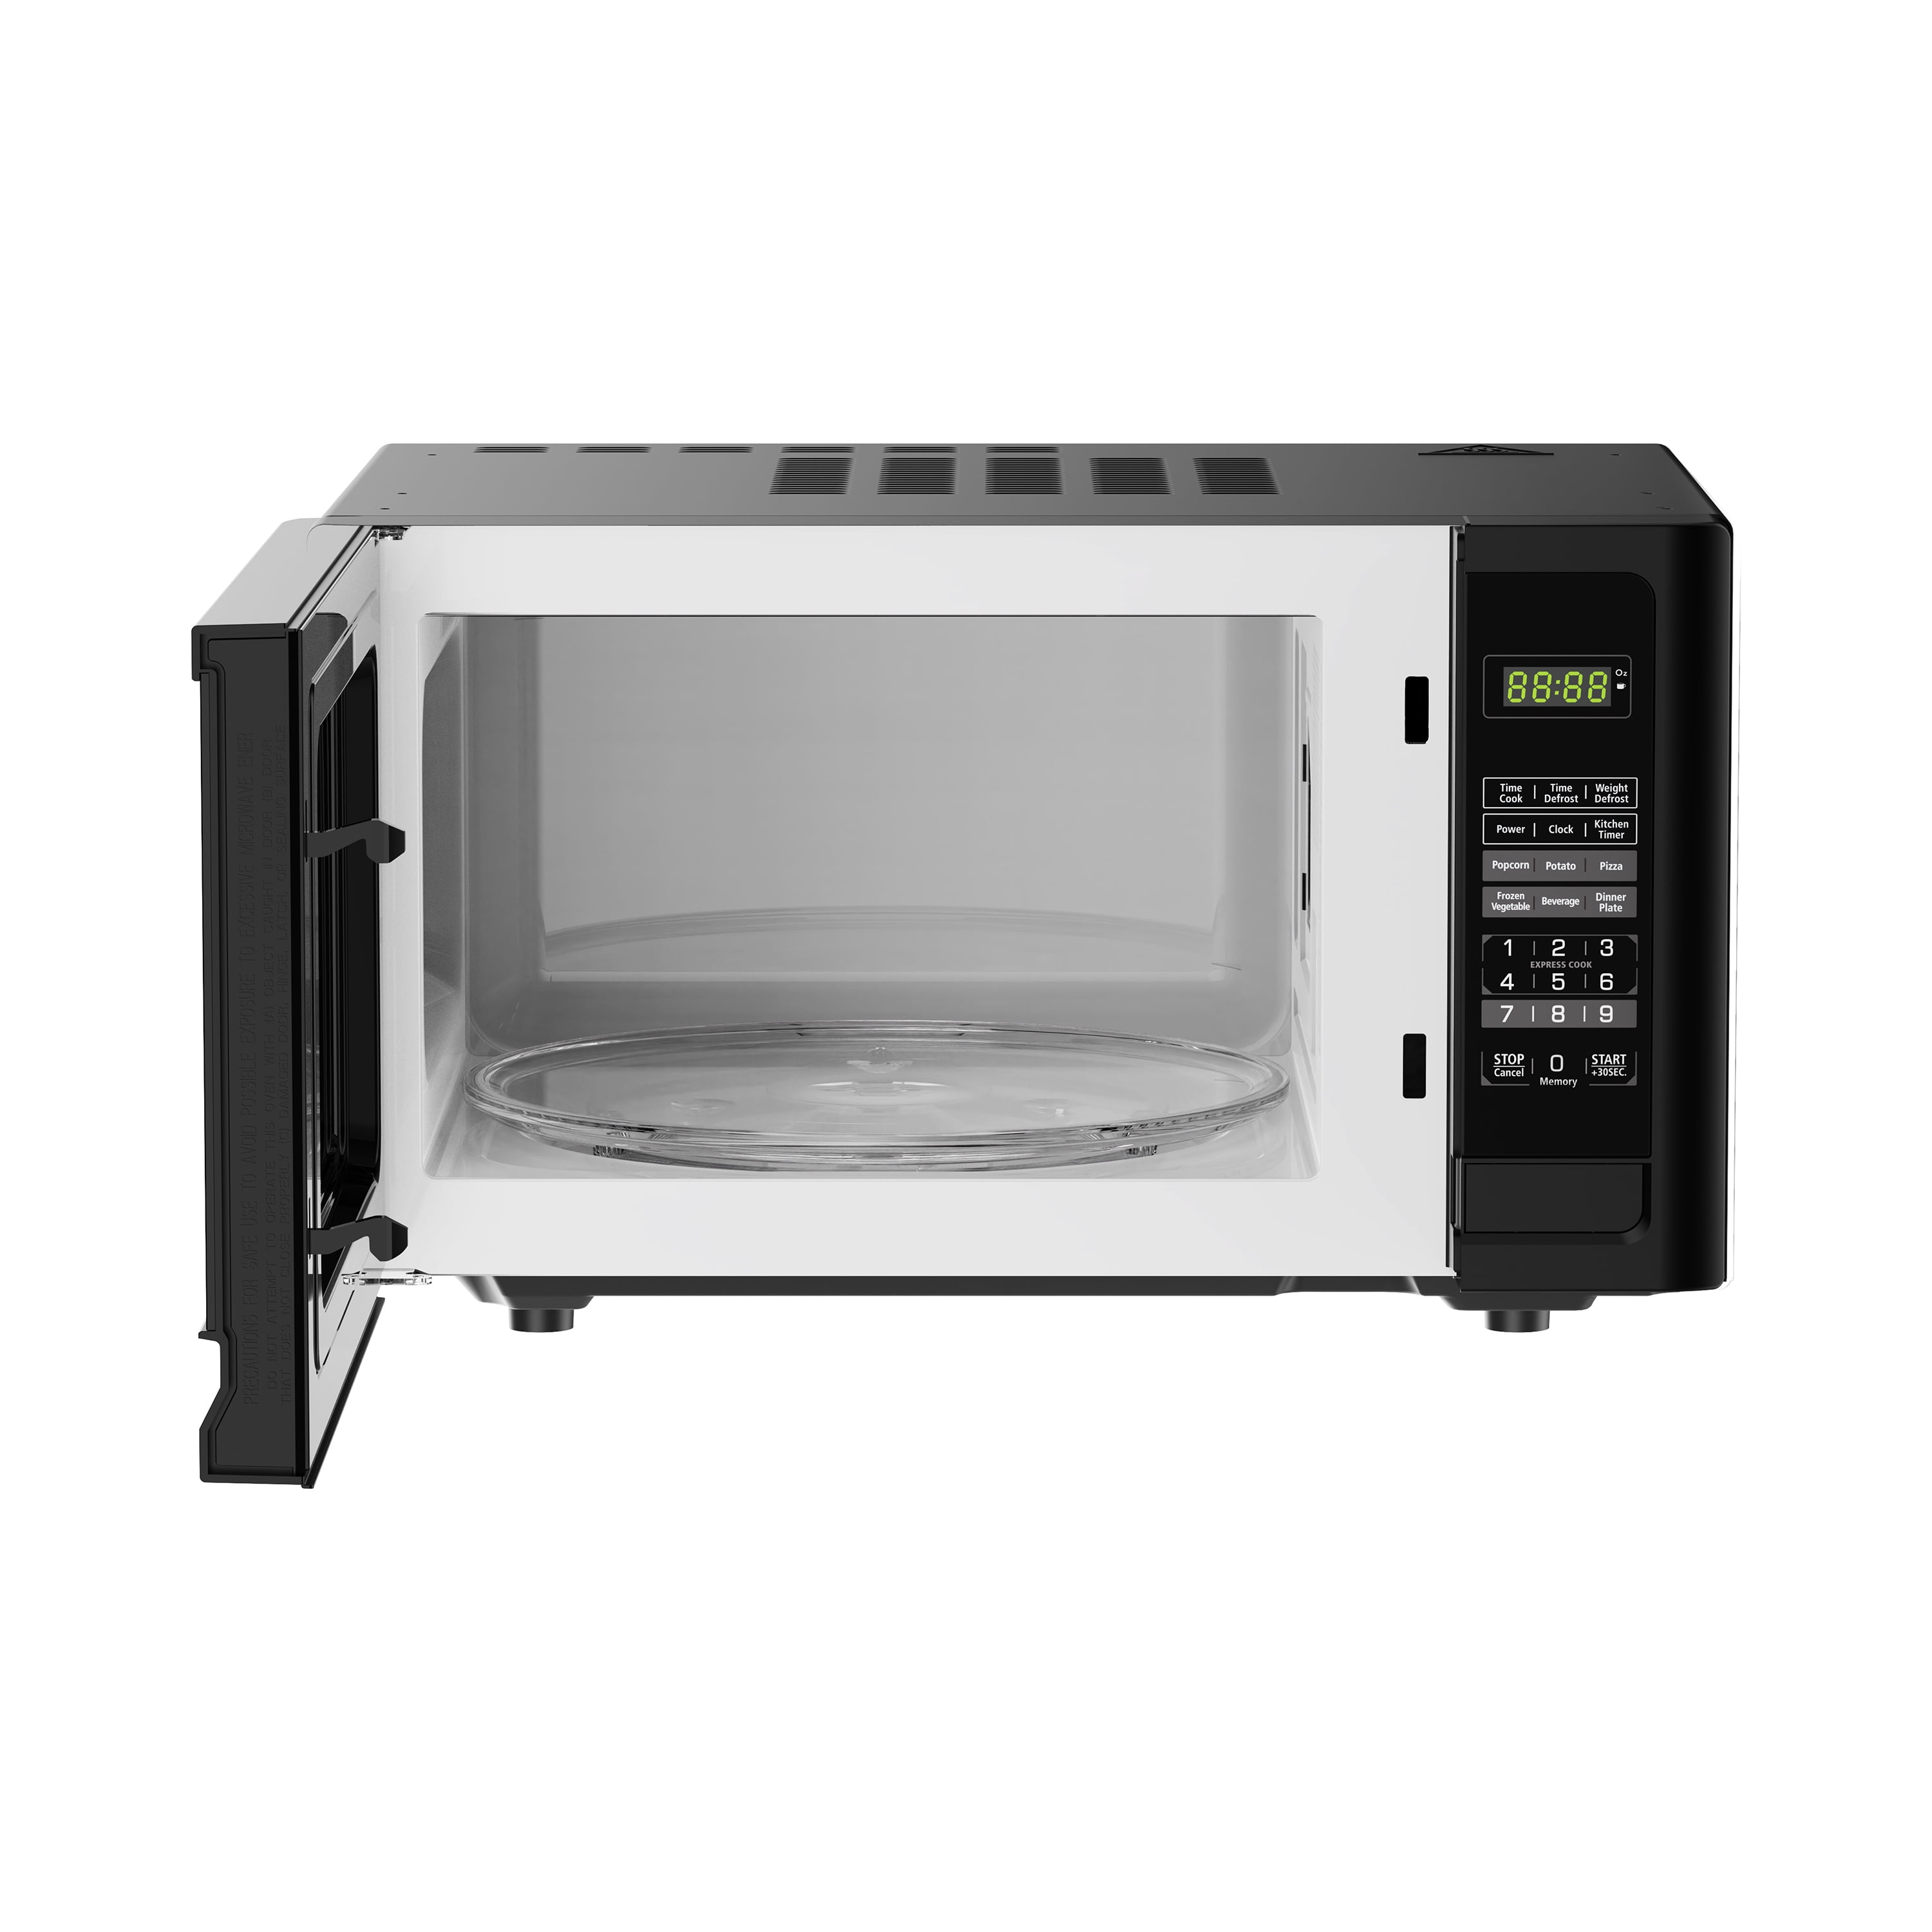  BLACK+DECKER EM031MB11 Digital Microwave Oven with Turntable  Push-Button Door,Child Safety Lock,1000W,1.1cu.ft,Stainless Steel, 1.1  Cu.Ft & Countertop Convection Toaster Oven, Silver, CTO6335S : Home &  Kitchen